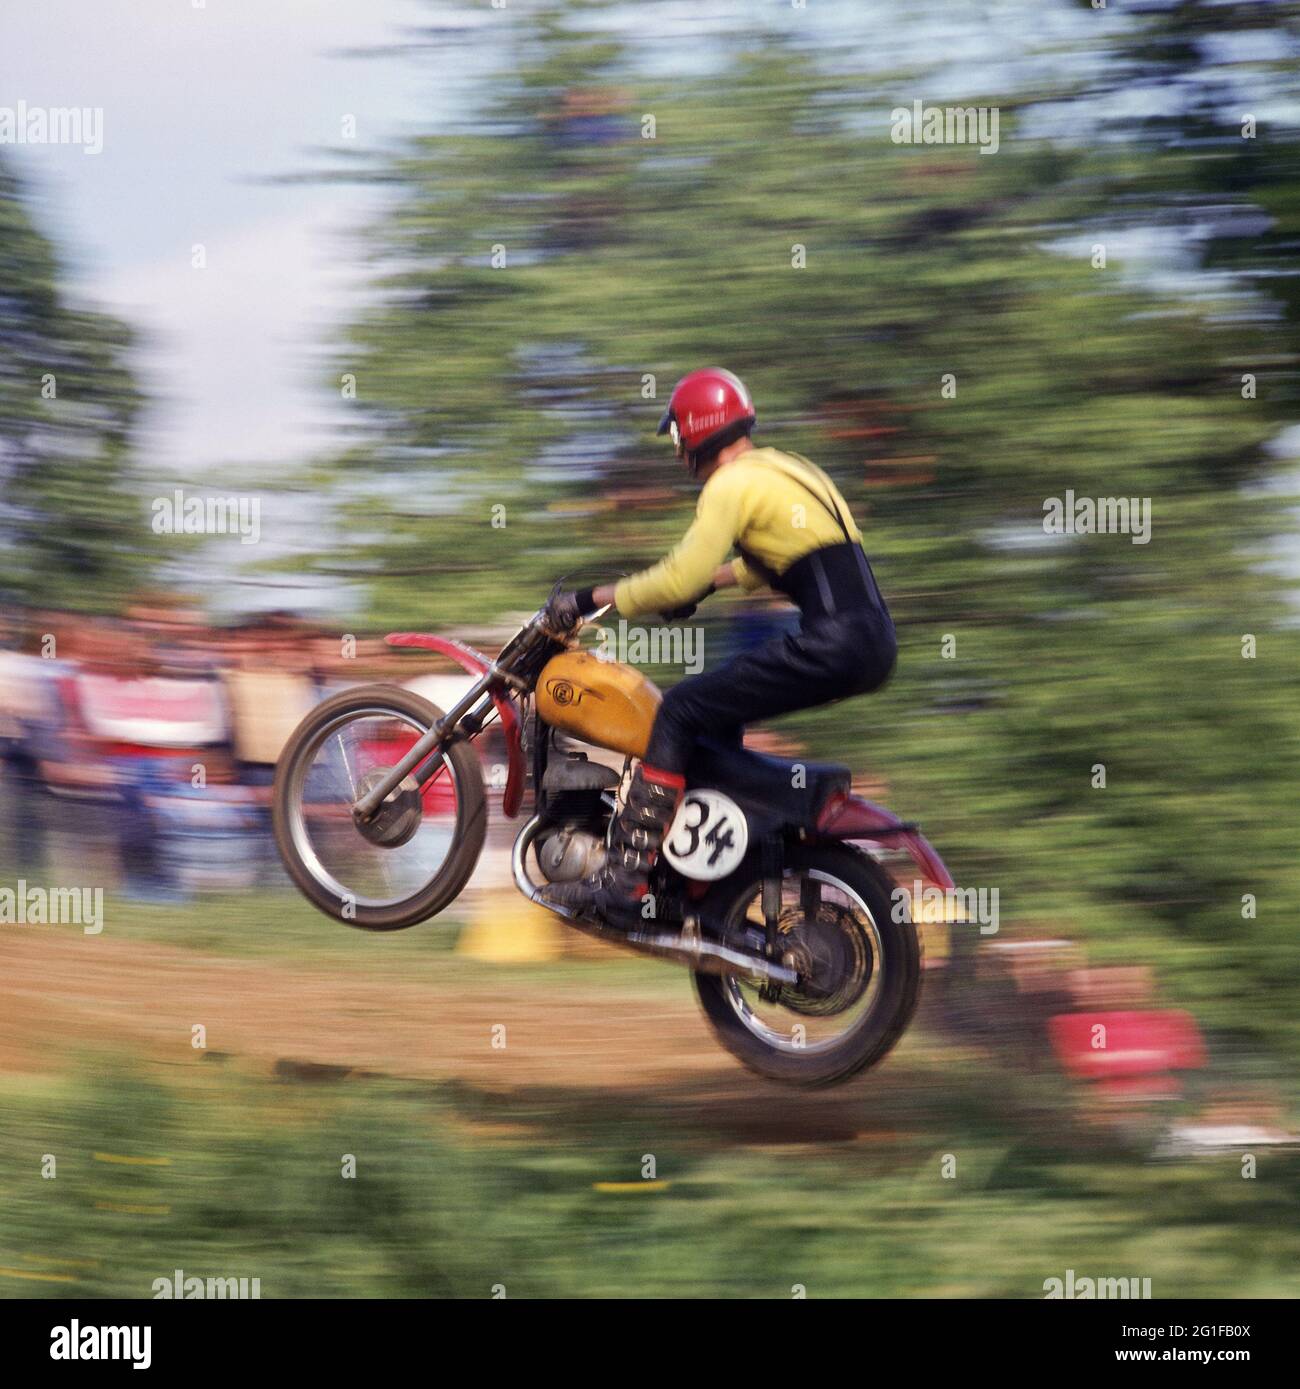 sports, motorcycle, motocross, driver during jump, 1970s, ADDITIONAL-RIGHTS-CLEARANCE-INFO-NOT-AVAILABLE Stock Photo